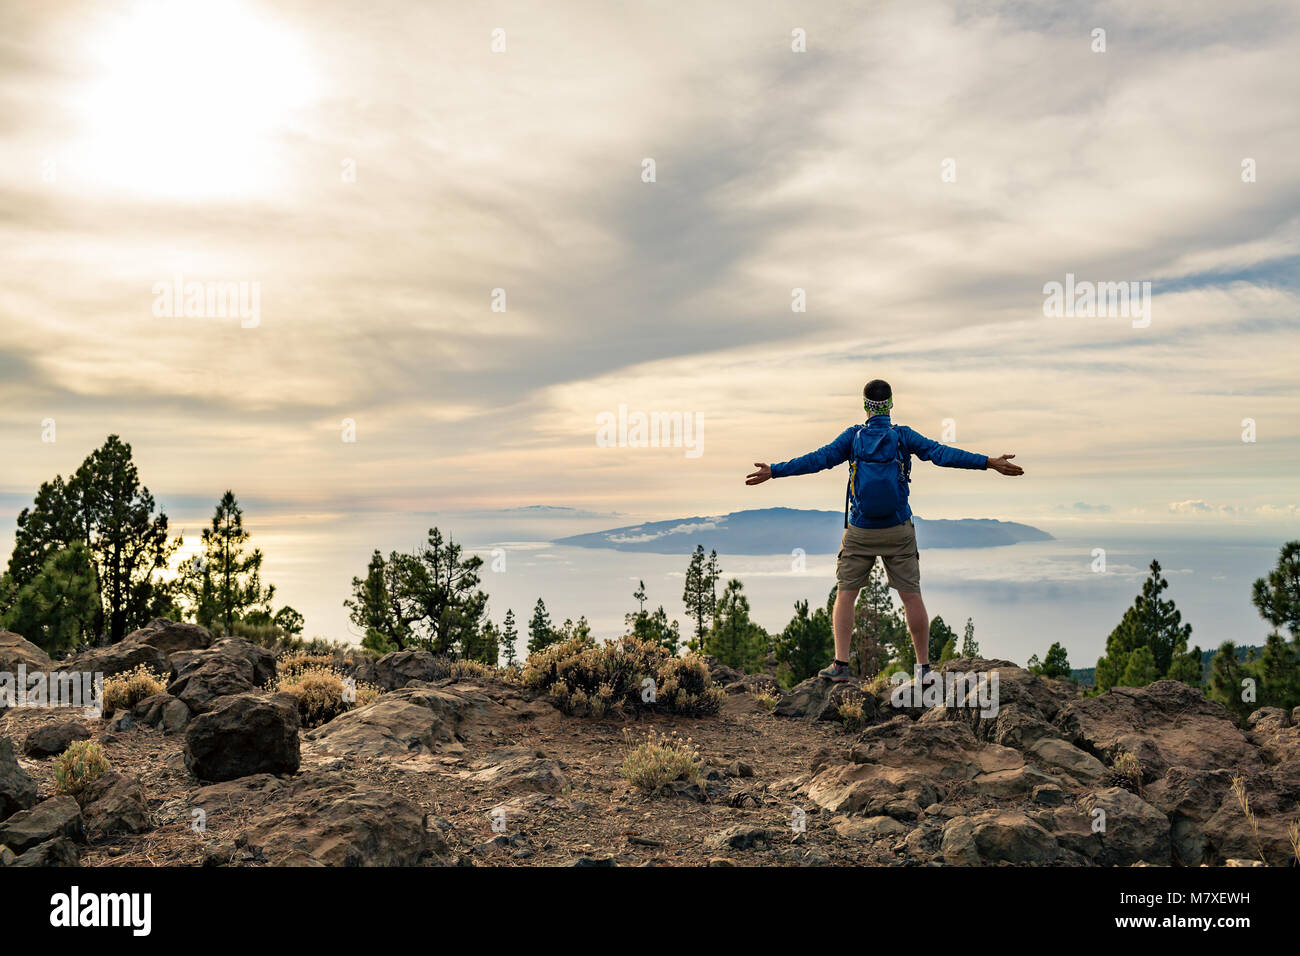 Man celebrating sunset looking at view in mountains. Trail runner, hiker or climber reached top of a mountain, enjoy inspirational landscape on rocky  Stock Photo